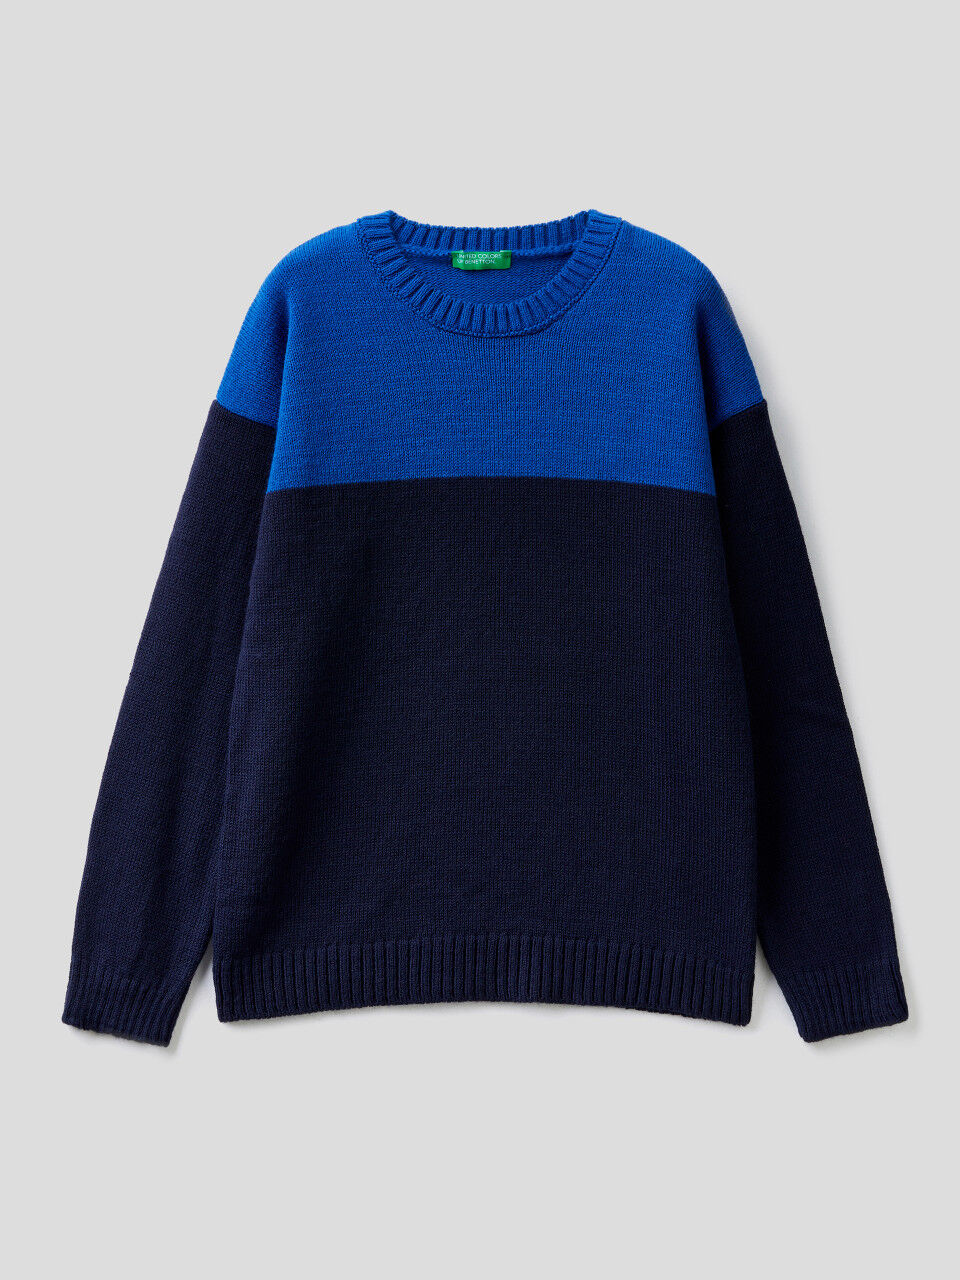 Kids Boys United Colors of Benetton Clothing United Colors of Benetton Kids Sweaters & Cardigans United Colors of Benetton Kids Sweaters  United Colors of Benetton Kids Sweater UNITED COLORS OF BENETTON 13-14 ye Sweaters  United Colors of Benetton Kids 